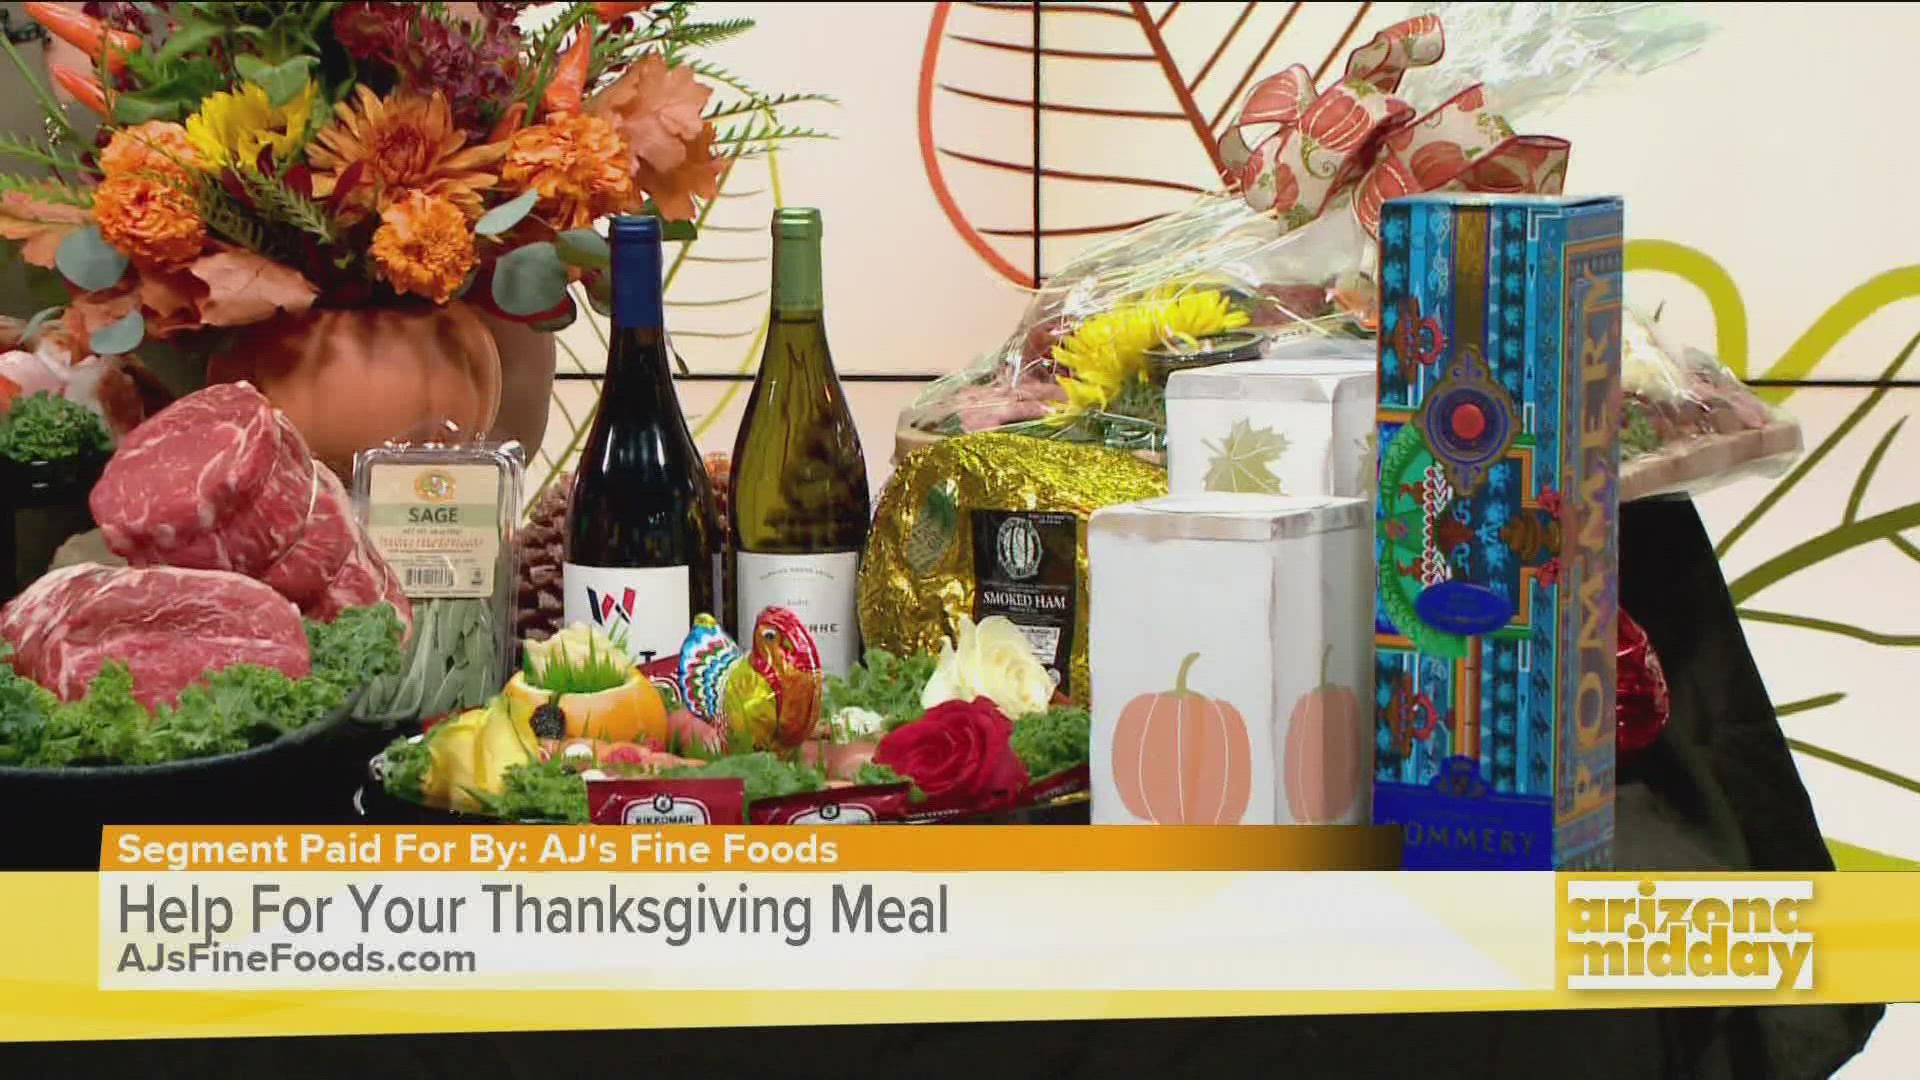 Jerry with AJ's Fine Foods stopped by to share how the store can help you prepare for your Thanksgiving gathering from food to flowers and more.